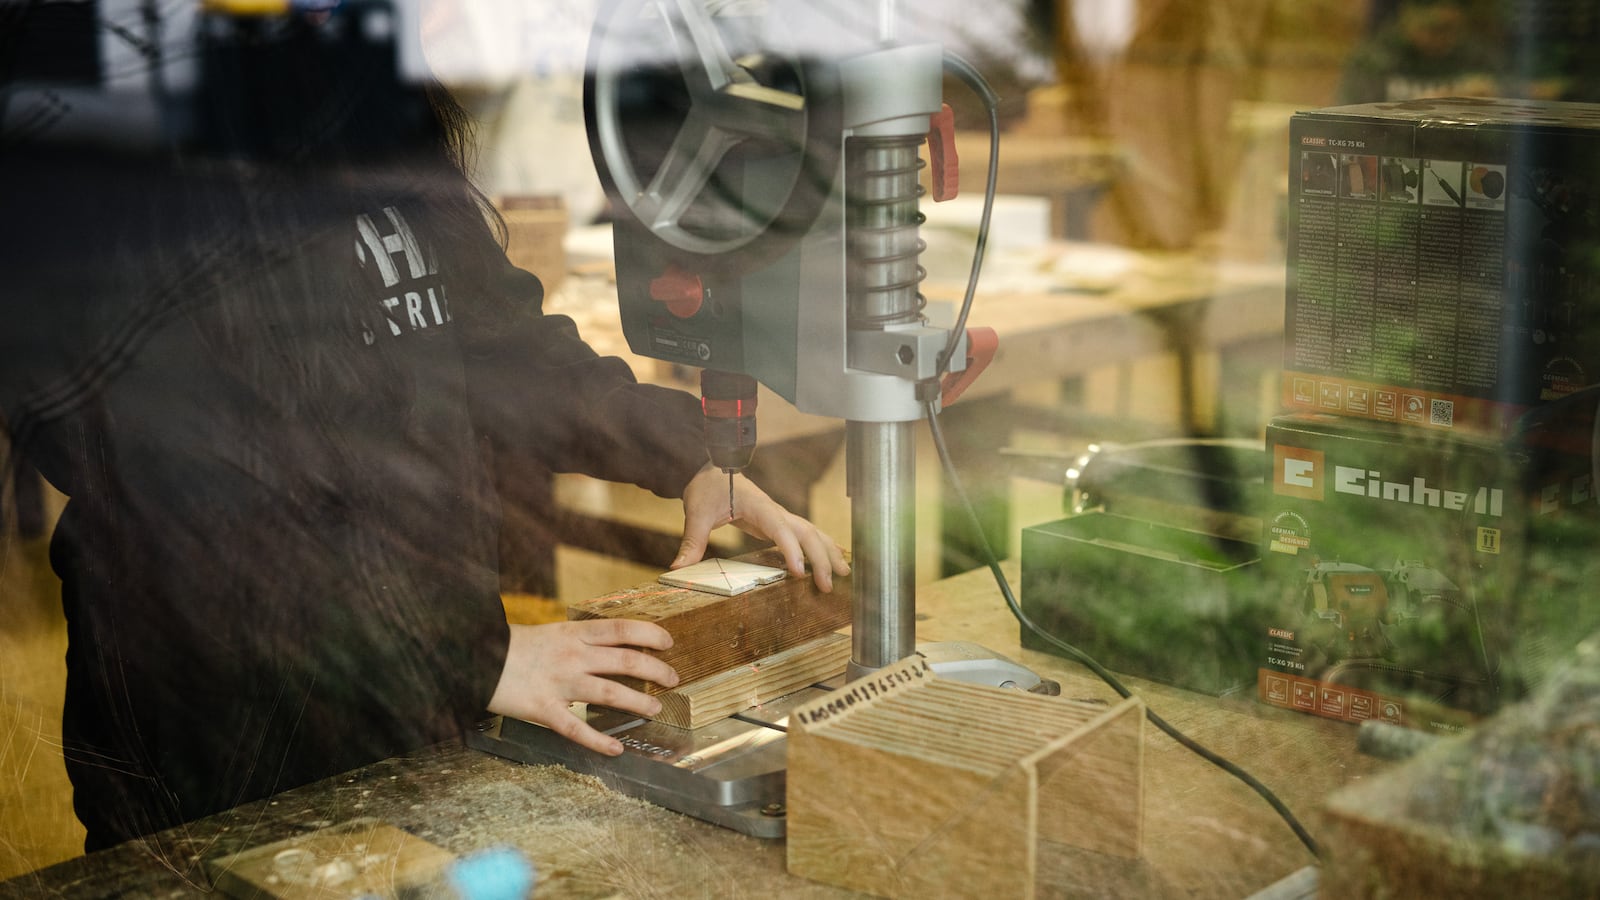 A view through a window shows a student's pair of hands working on a drill.